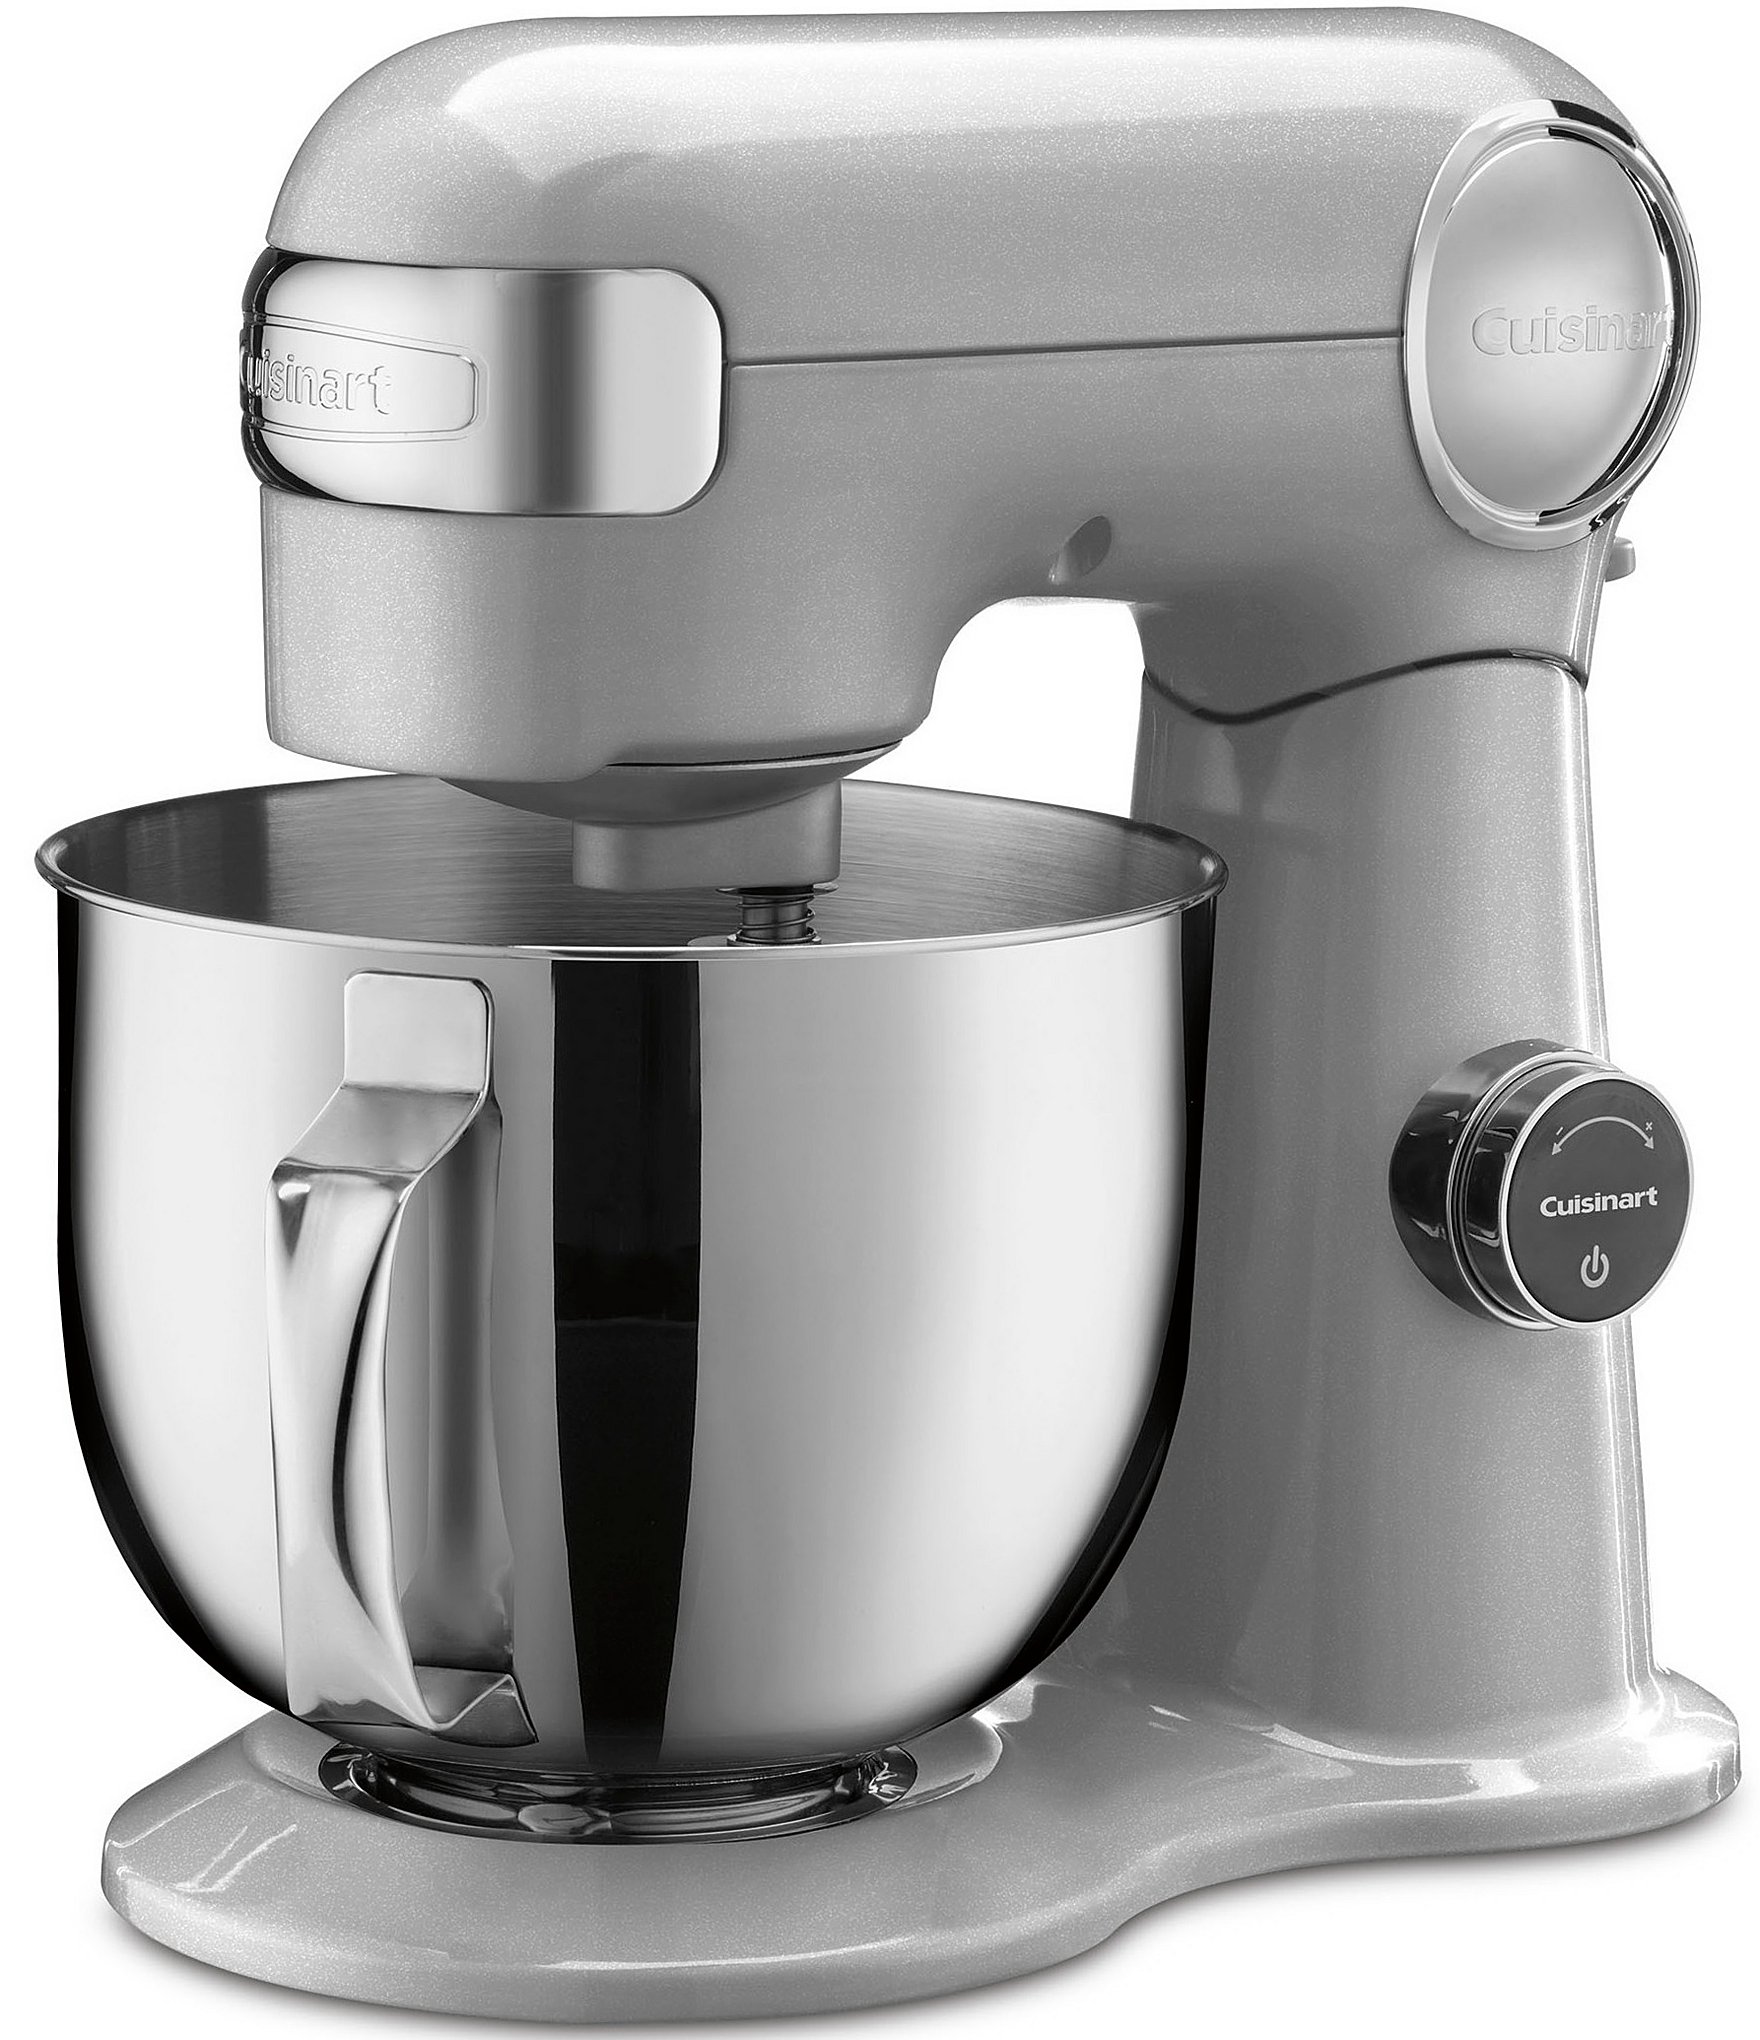 Wolf Gourmet® 7-Quart Brushed Stainless Steel Stand Mixer